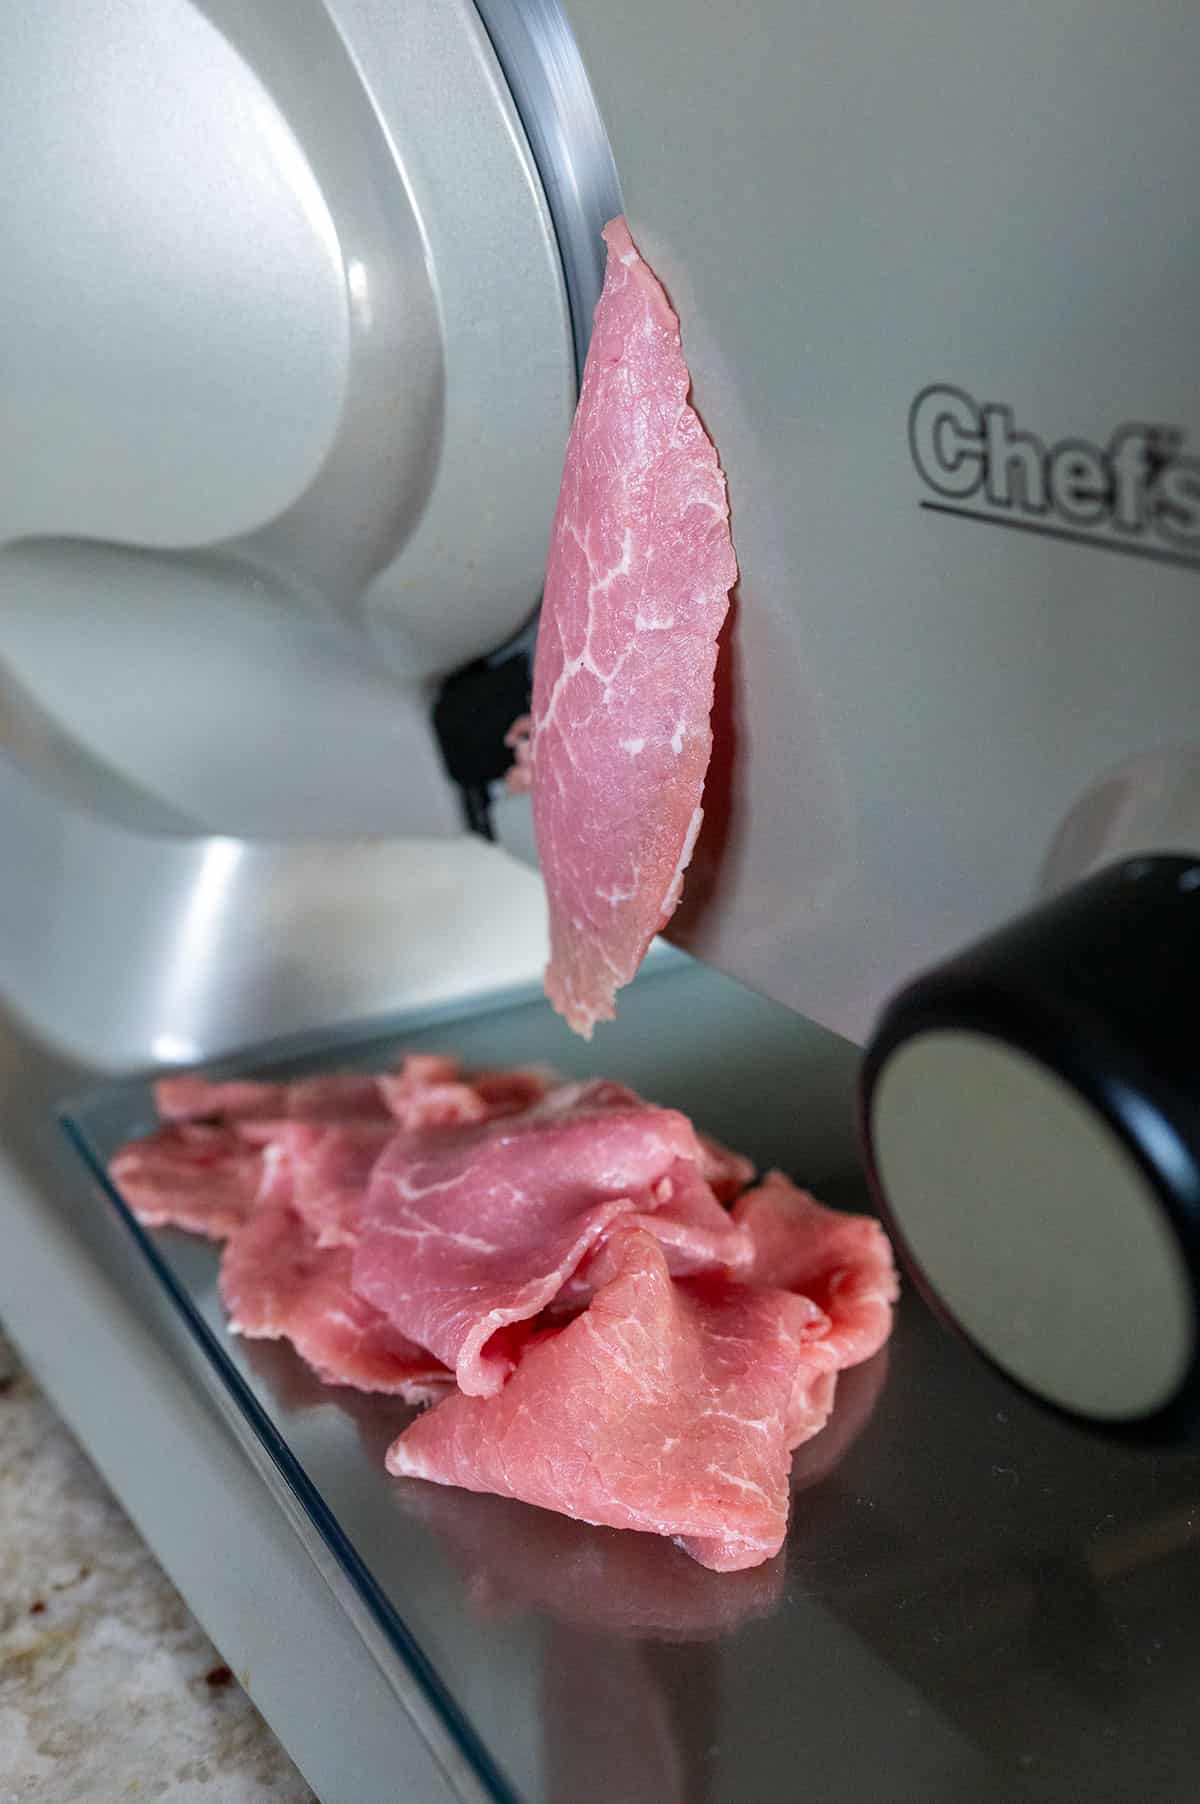 Eye of round sliced into thin strips with meat slicer.